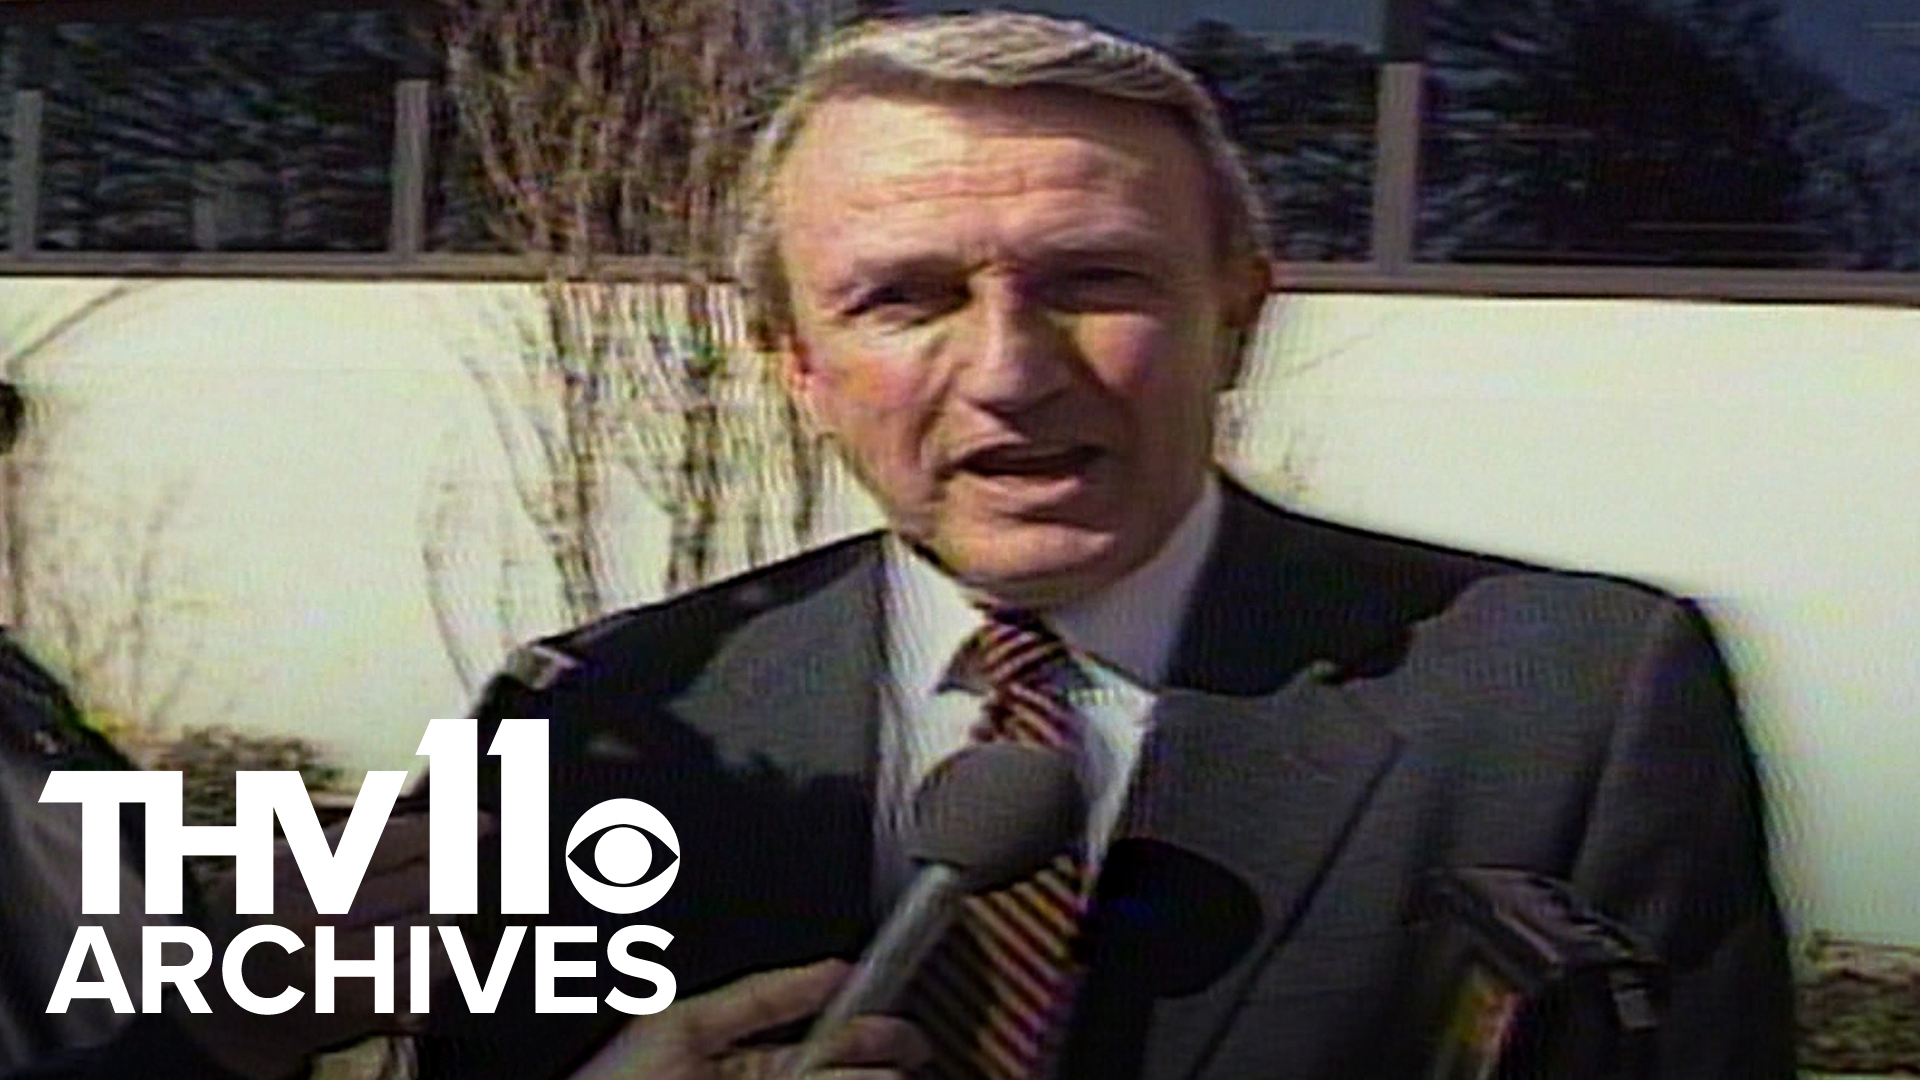 In January 2016, we remembered the legacy of former Governor Dale Bumpers who passed away at the age of 90 on January 1, 2016.